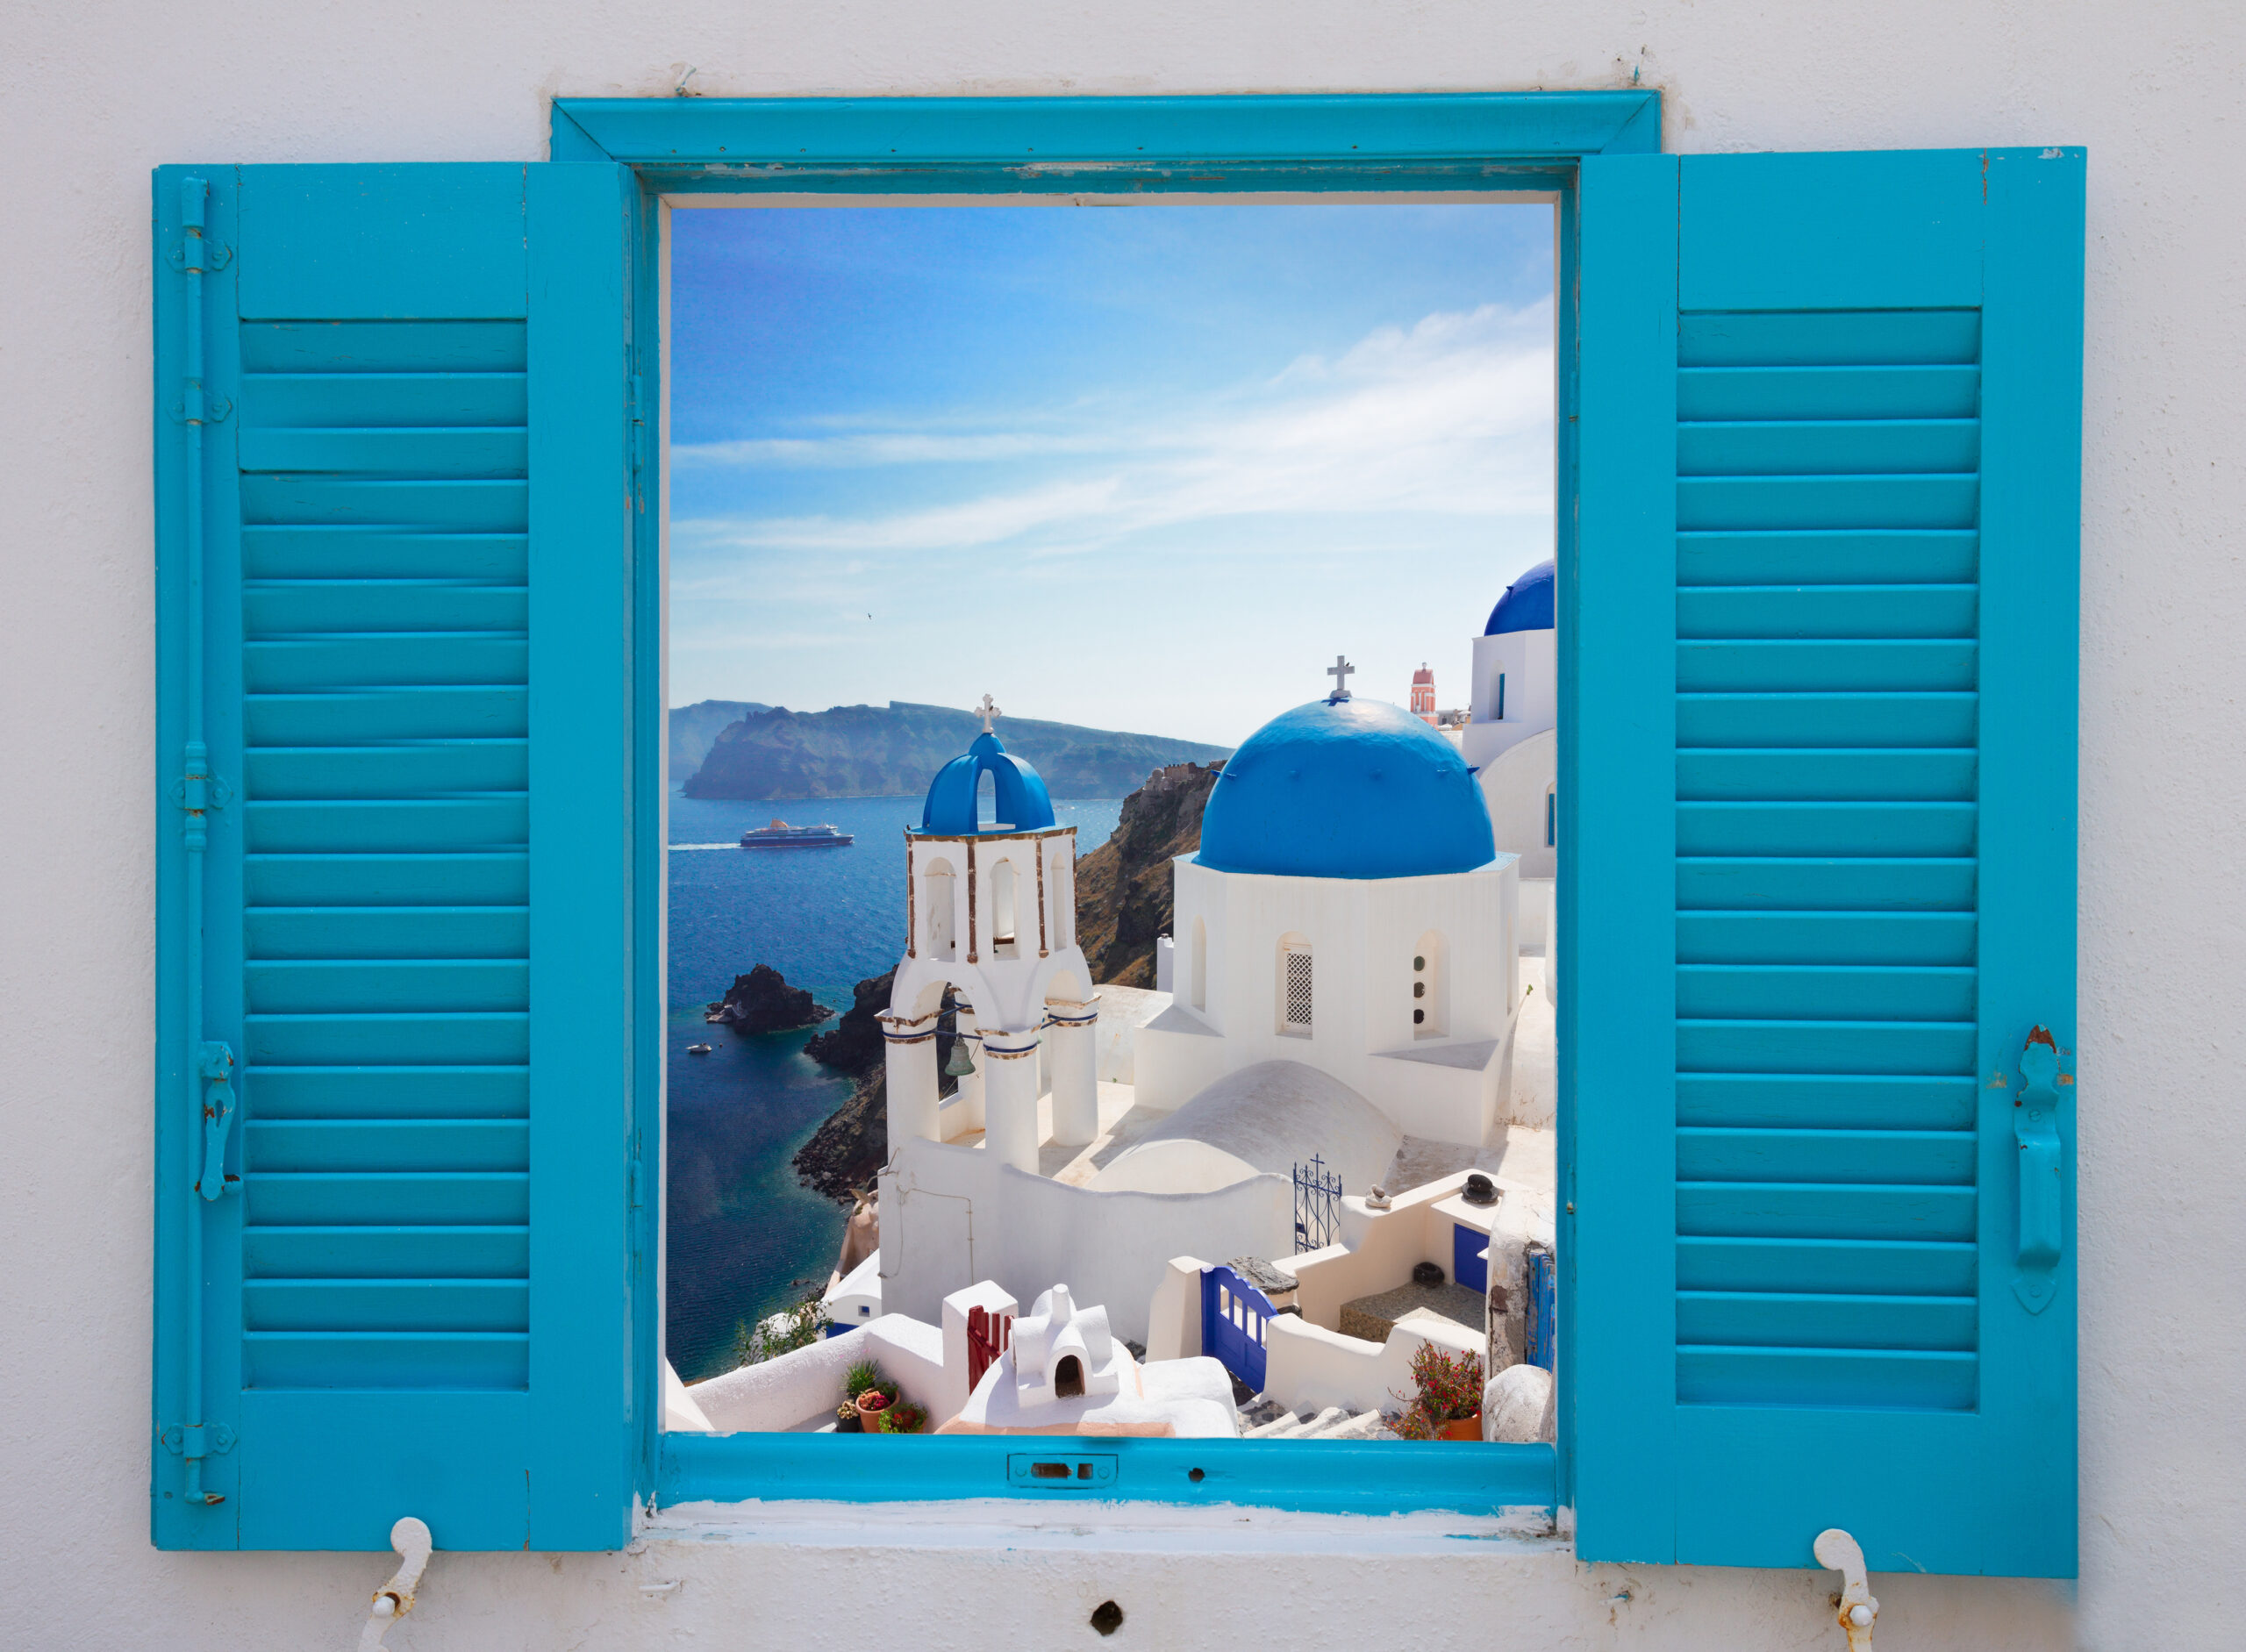 Window with blue shutters with view of town and classical church with blue domes